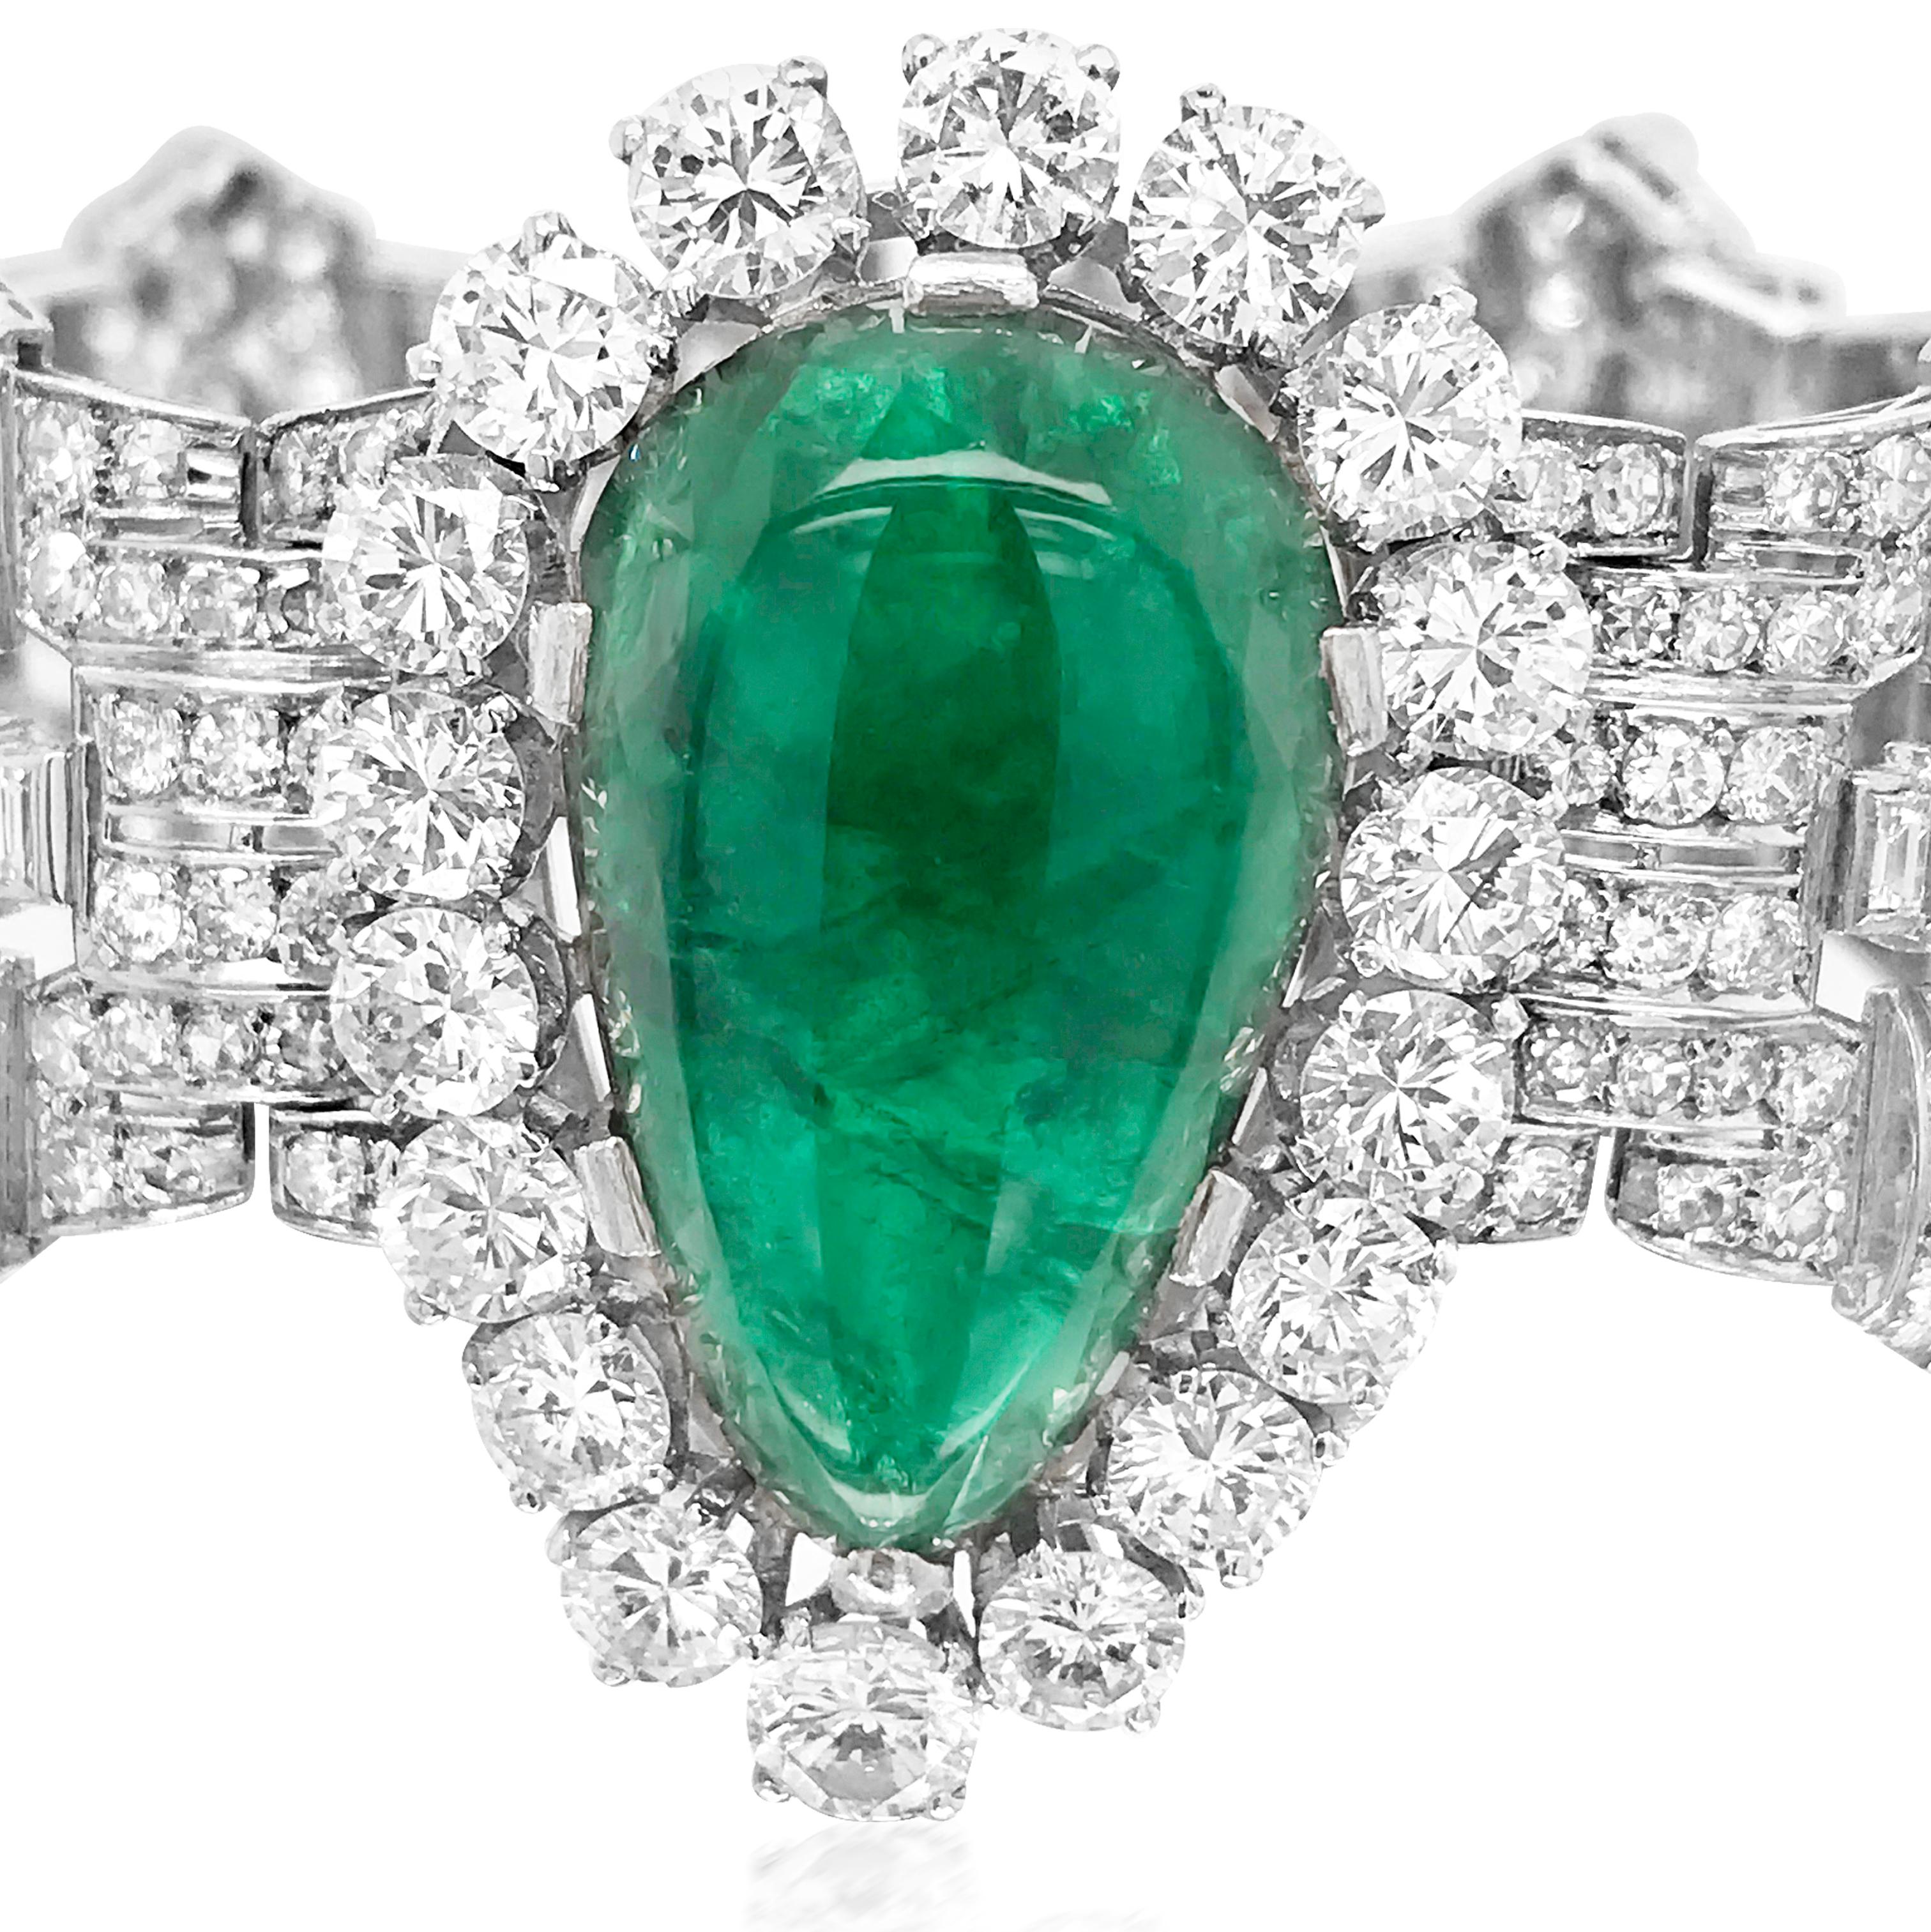 Pear-Shaped 23 Carat Emerald Bracelet, Platinum and Diamond, Clerc In Excellent Condition For Sale In New York, NY